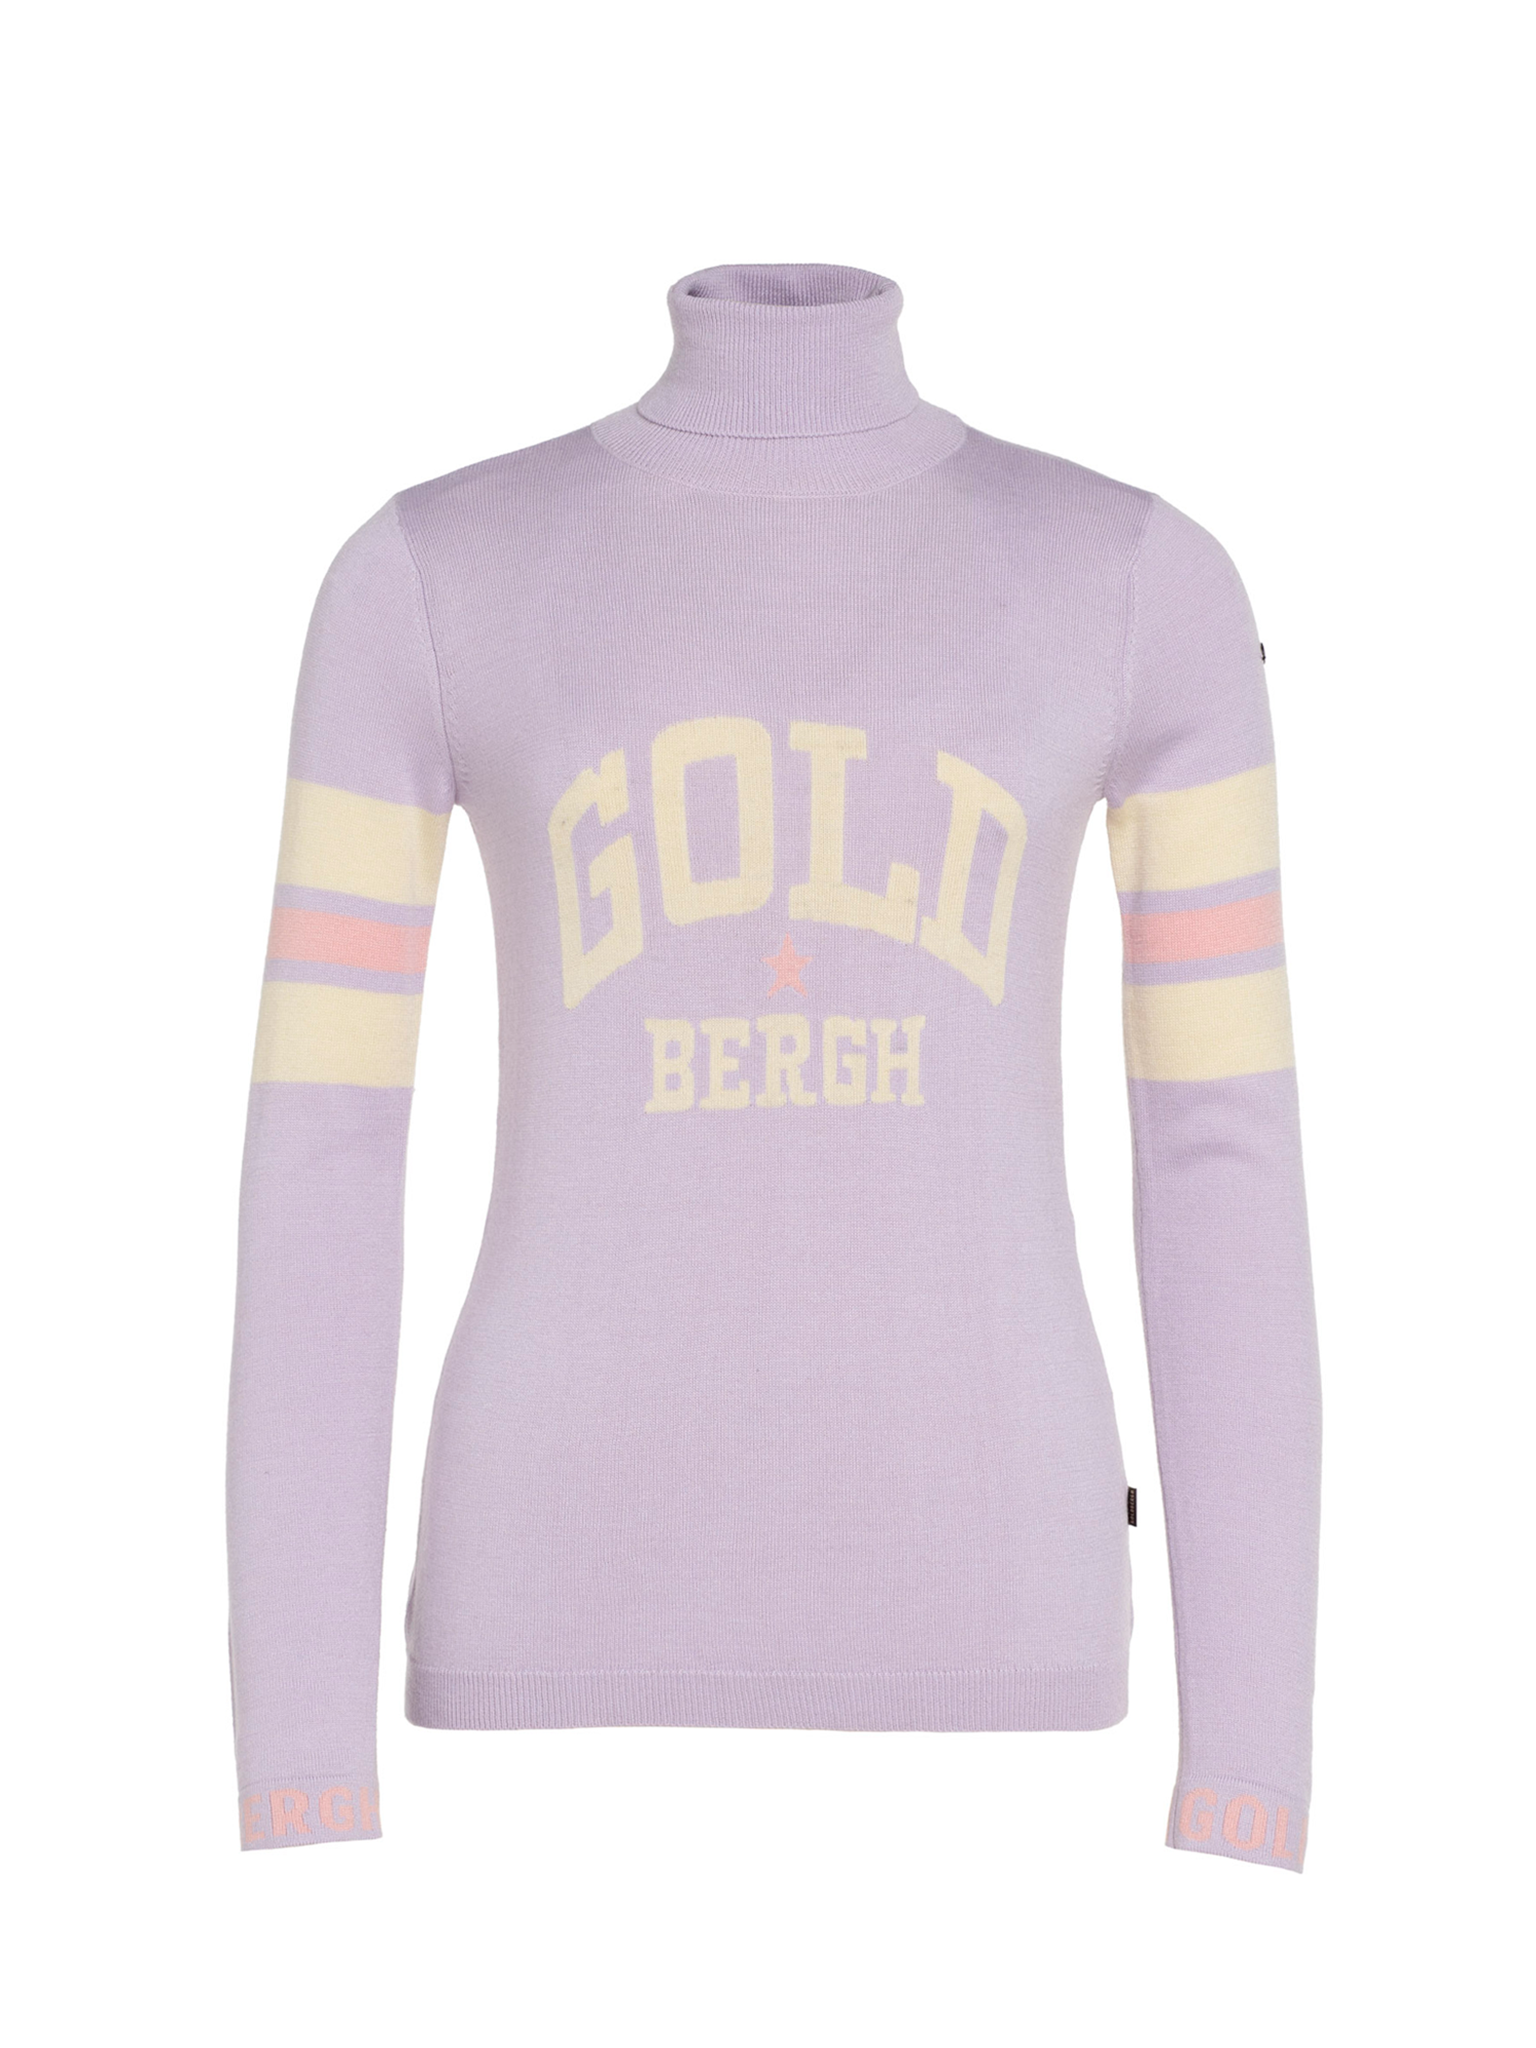 Goldbergh Biscuit Long Sleeve Knit Sweater